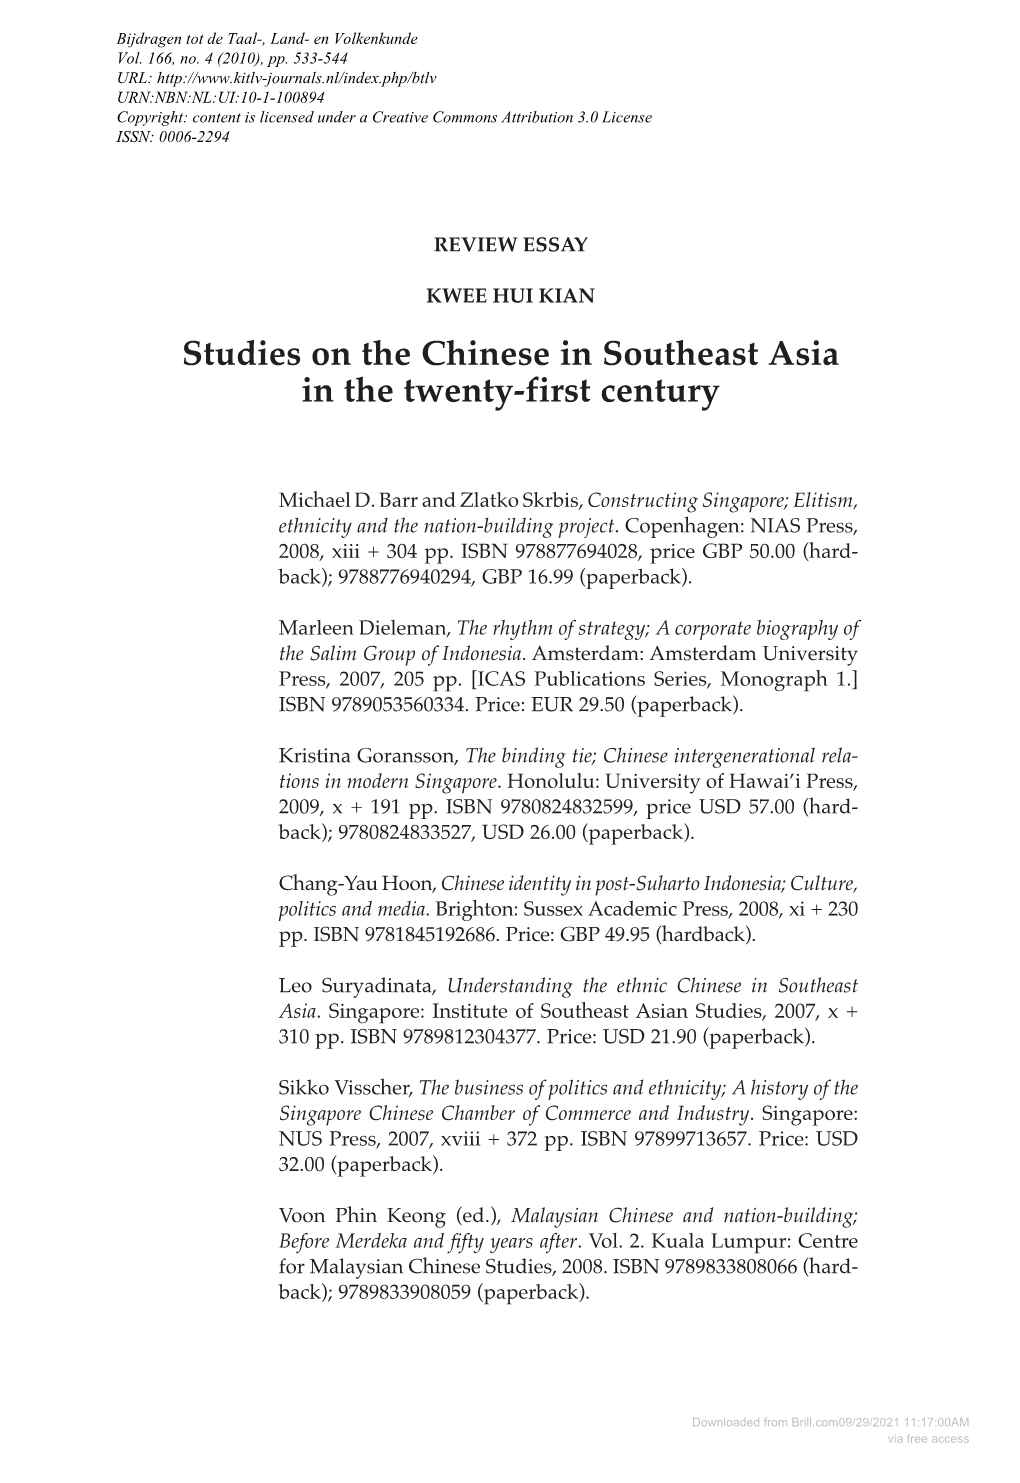 Studies on the Chinese in Southeast Asia in the Twenty-First Century